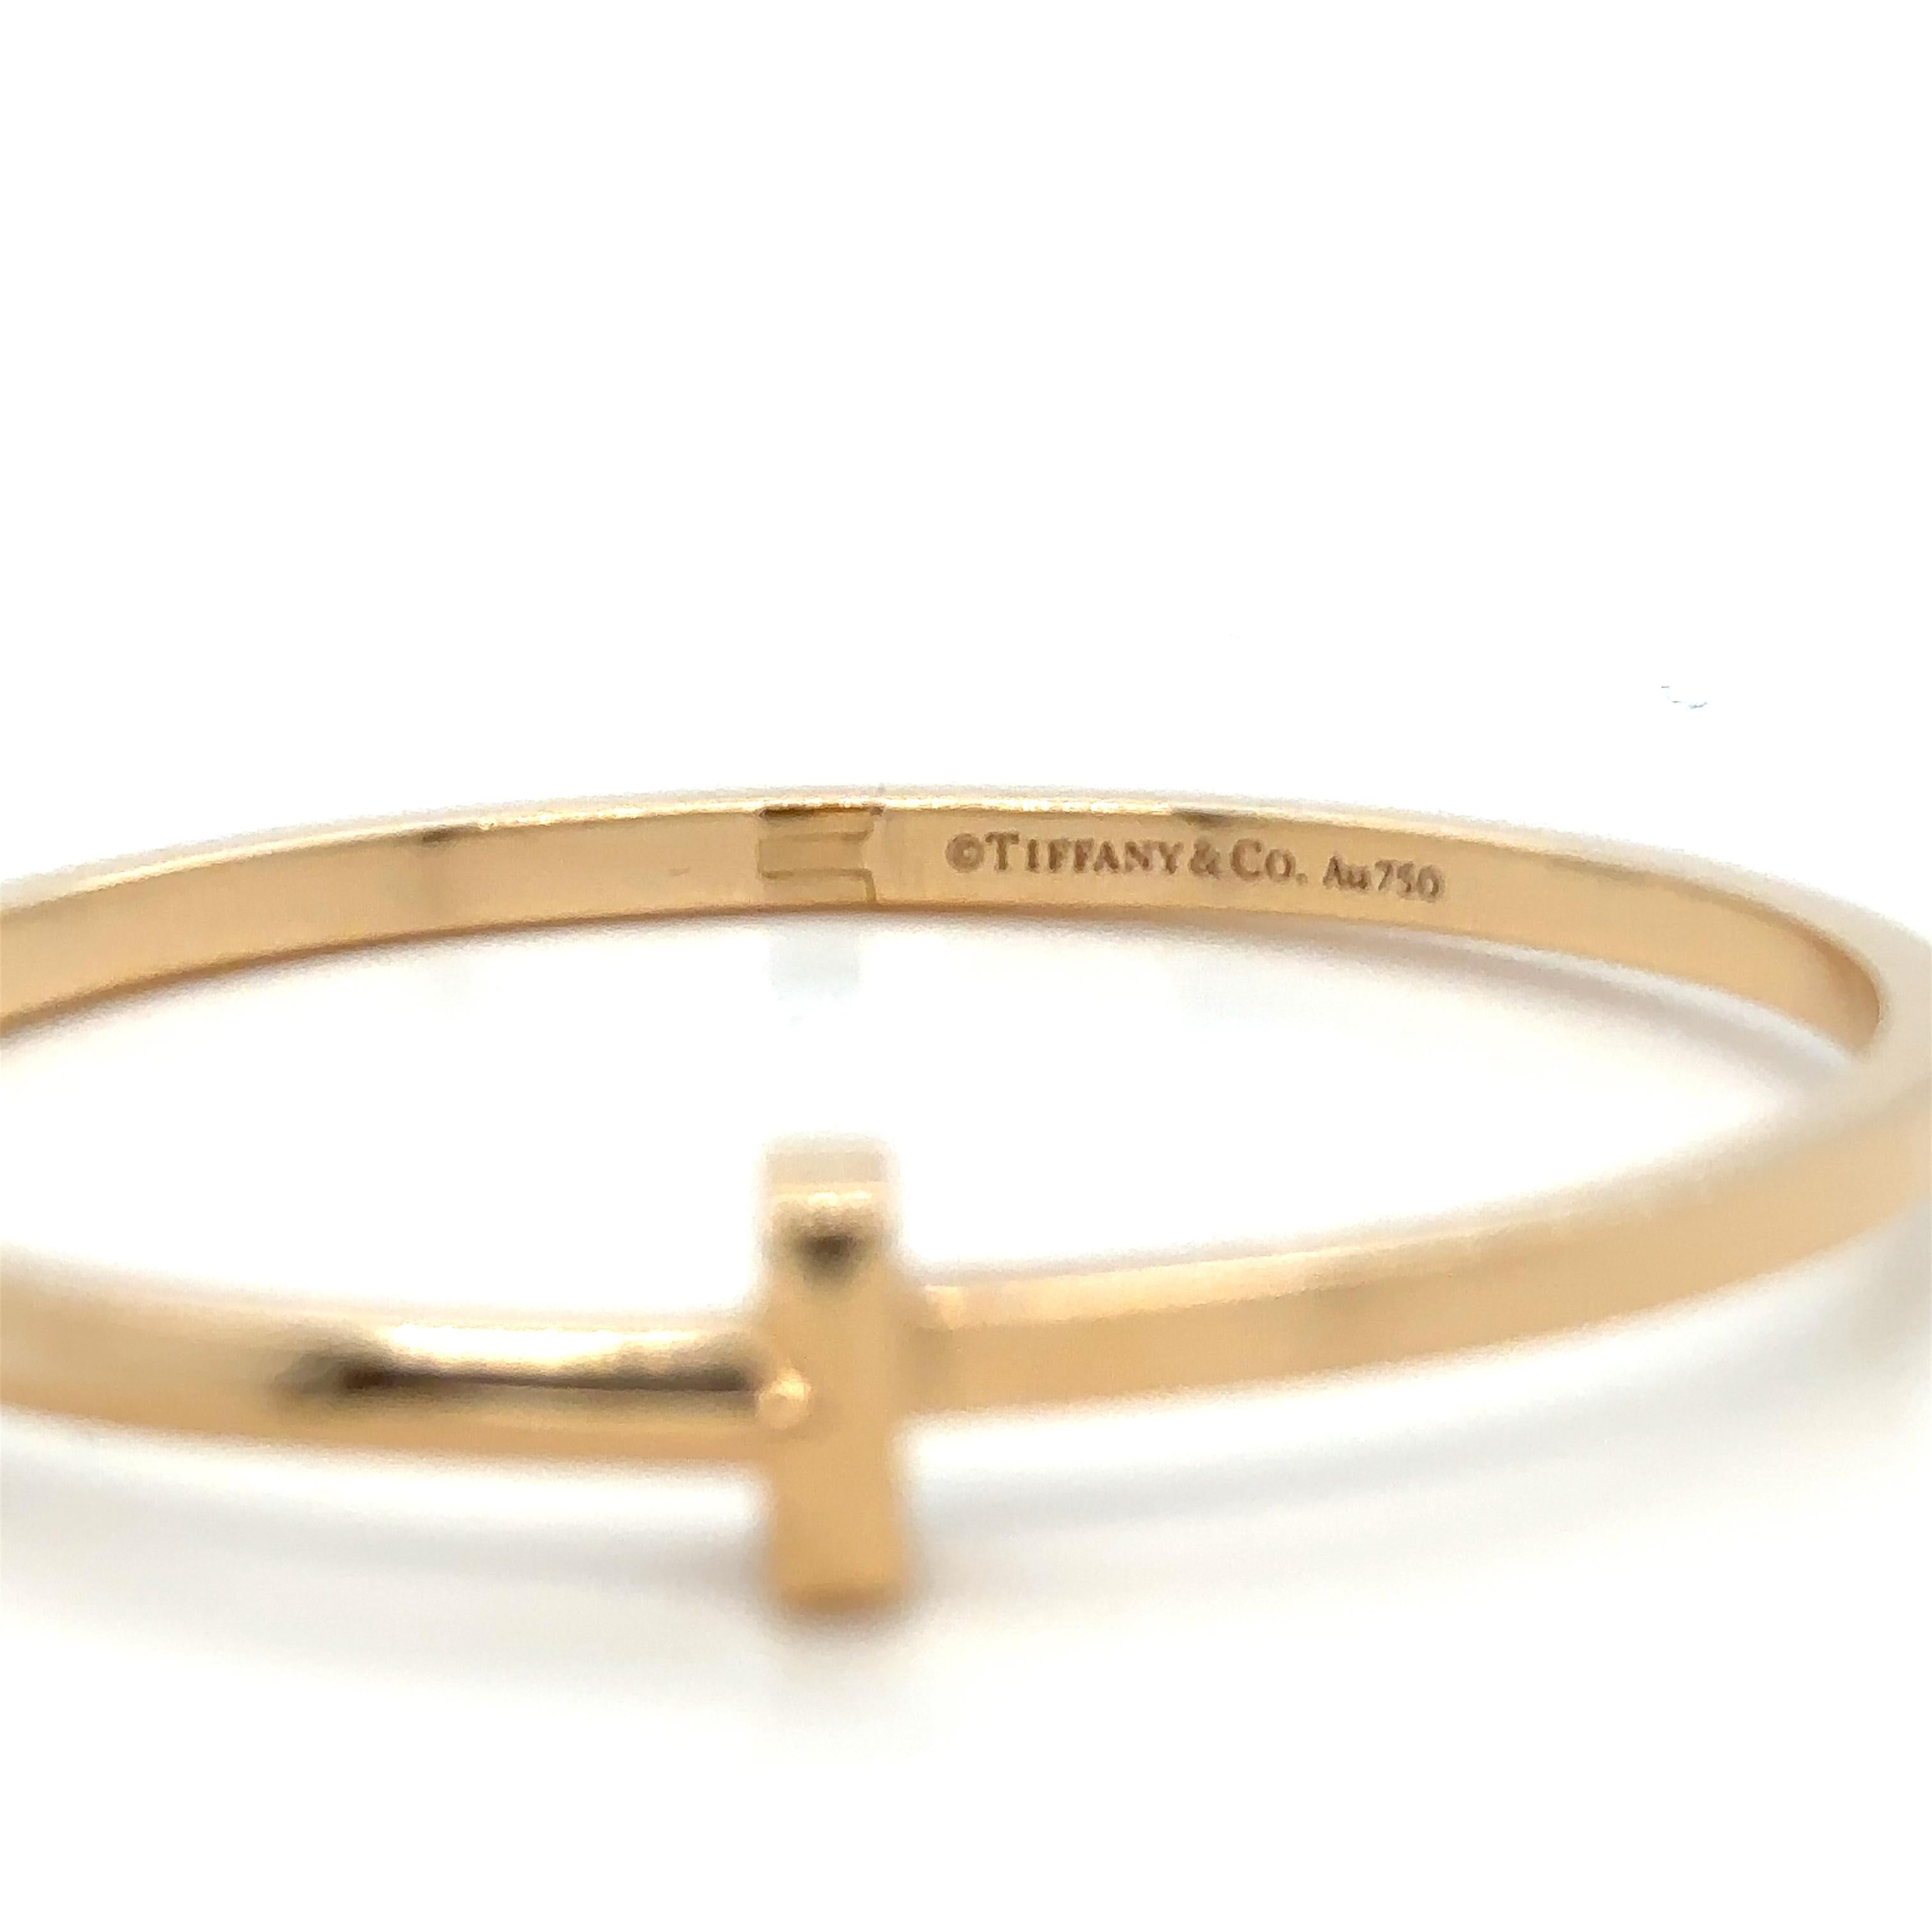 Unique features: 
Wrapped around the wearer in a continuous, unbroken circle, this narrow hinged bangle features a strong 